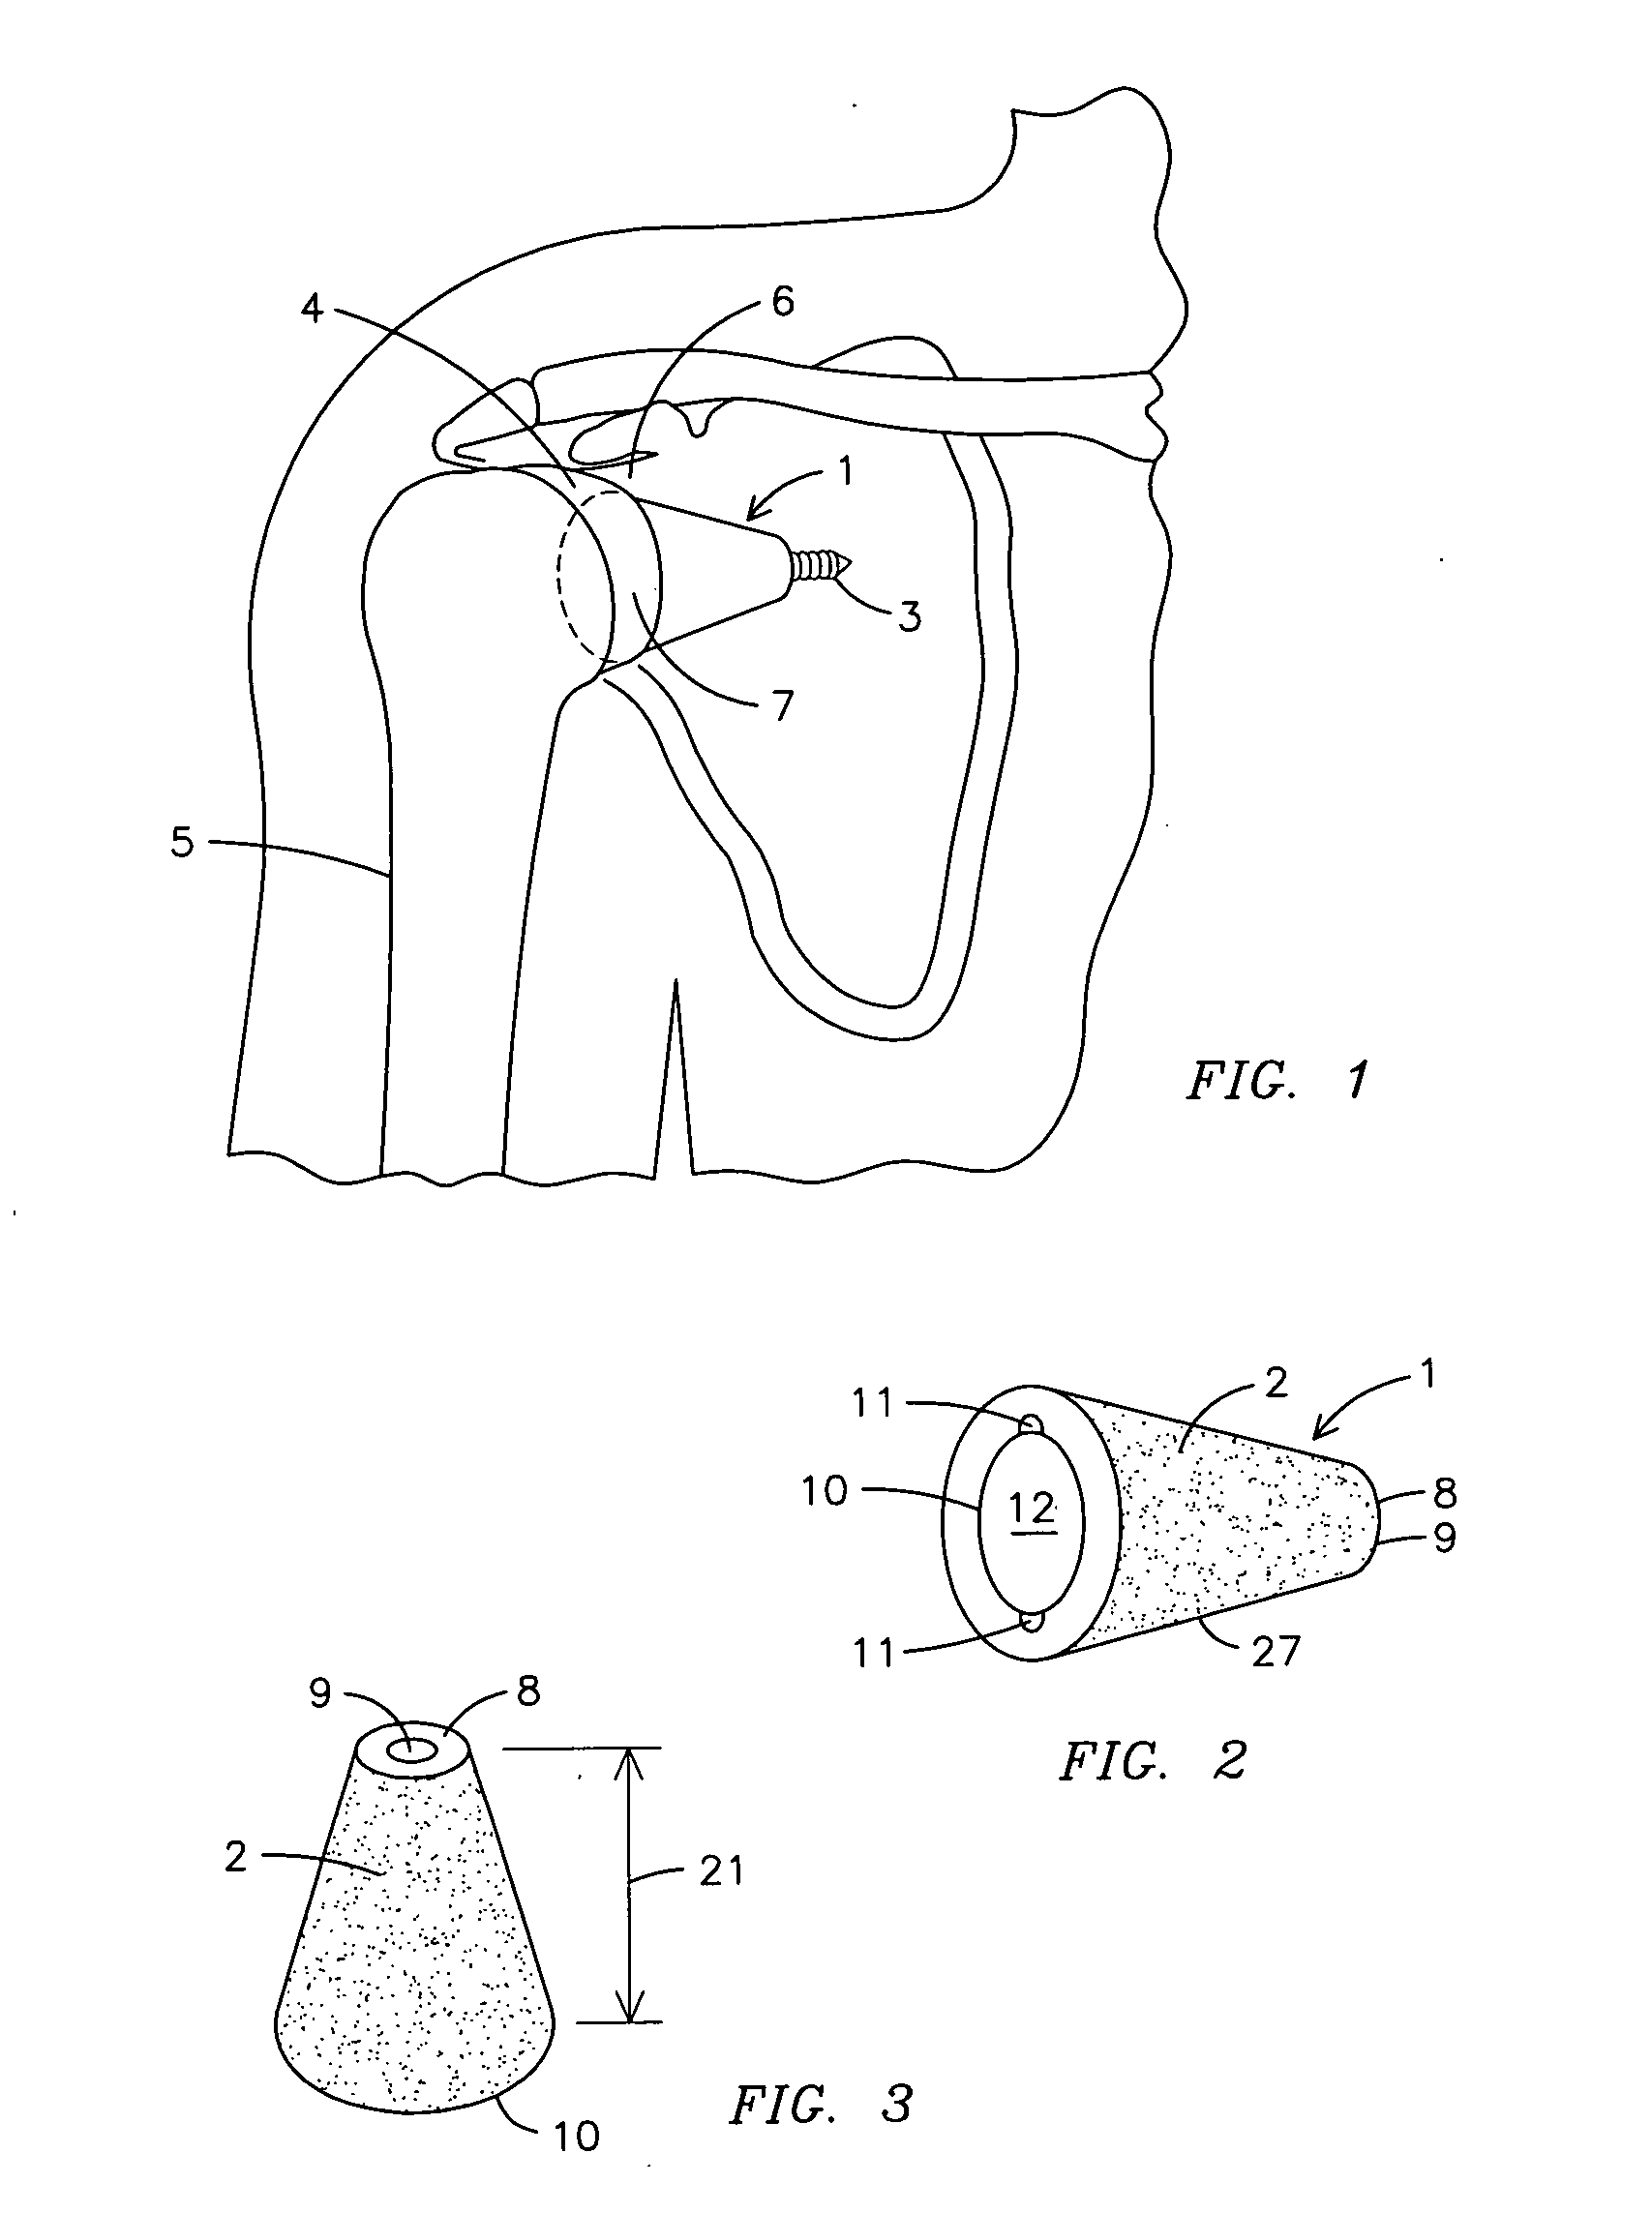 Conically-shaped glenoid implant with a prosthetic glenoid insert used in total shoulder arthroplasty and method